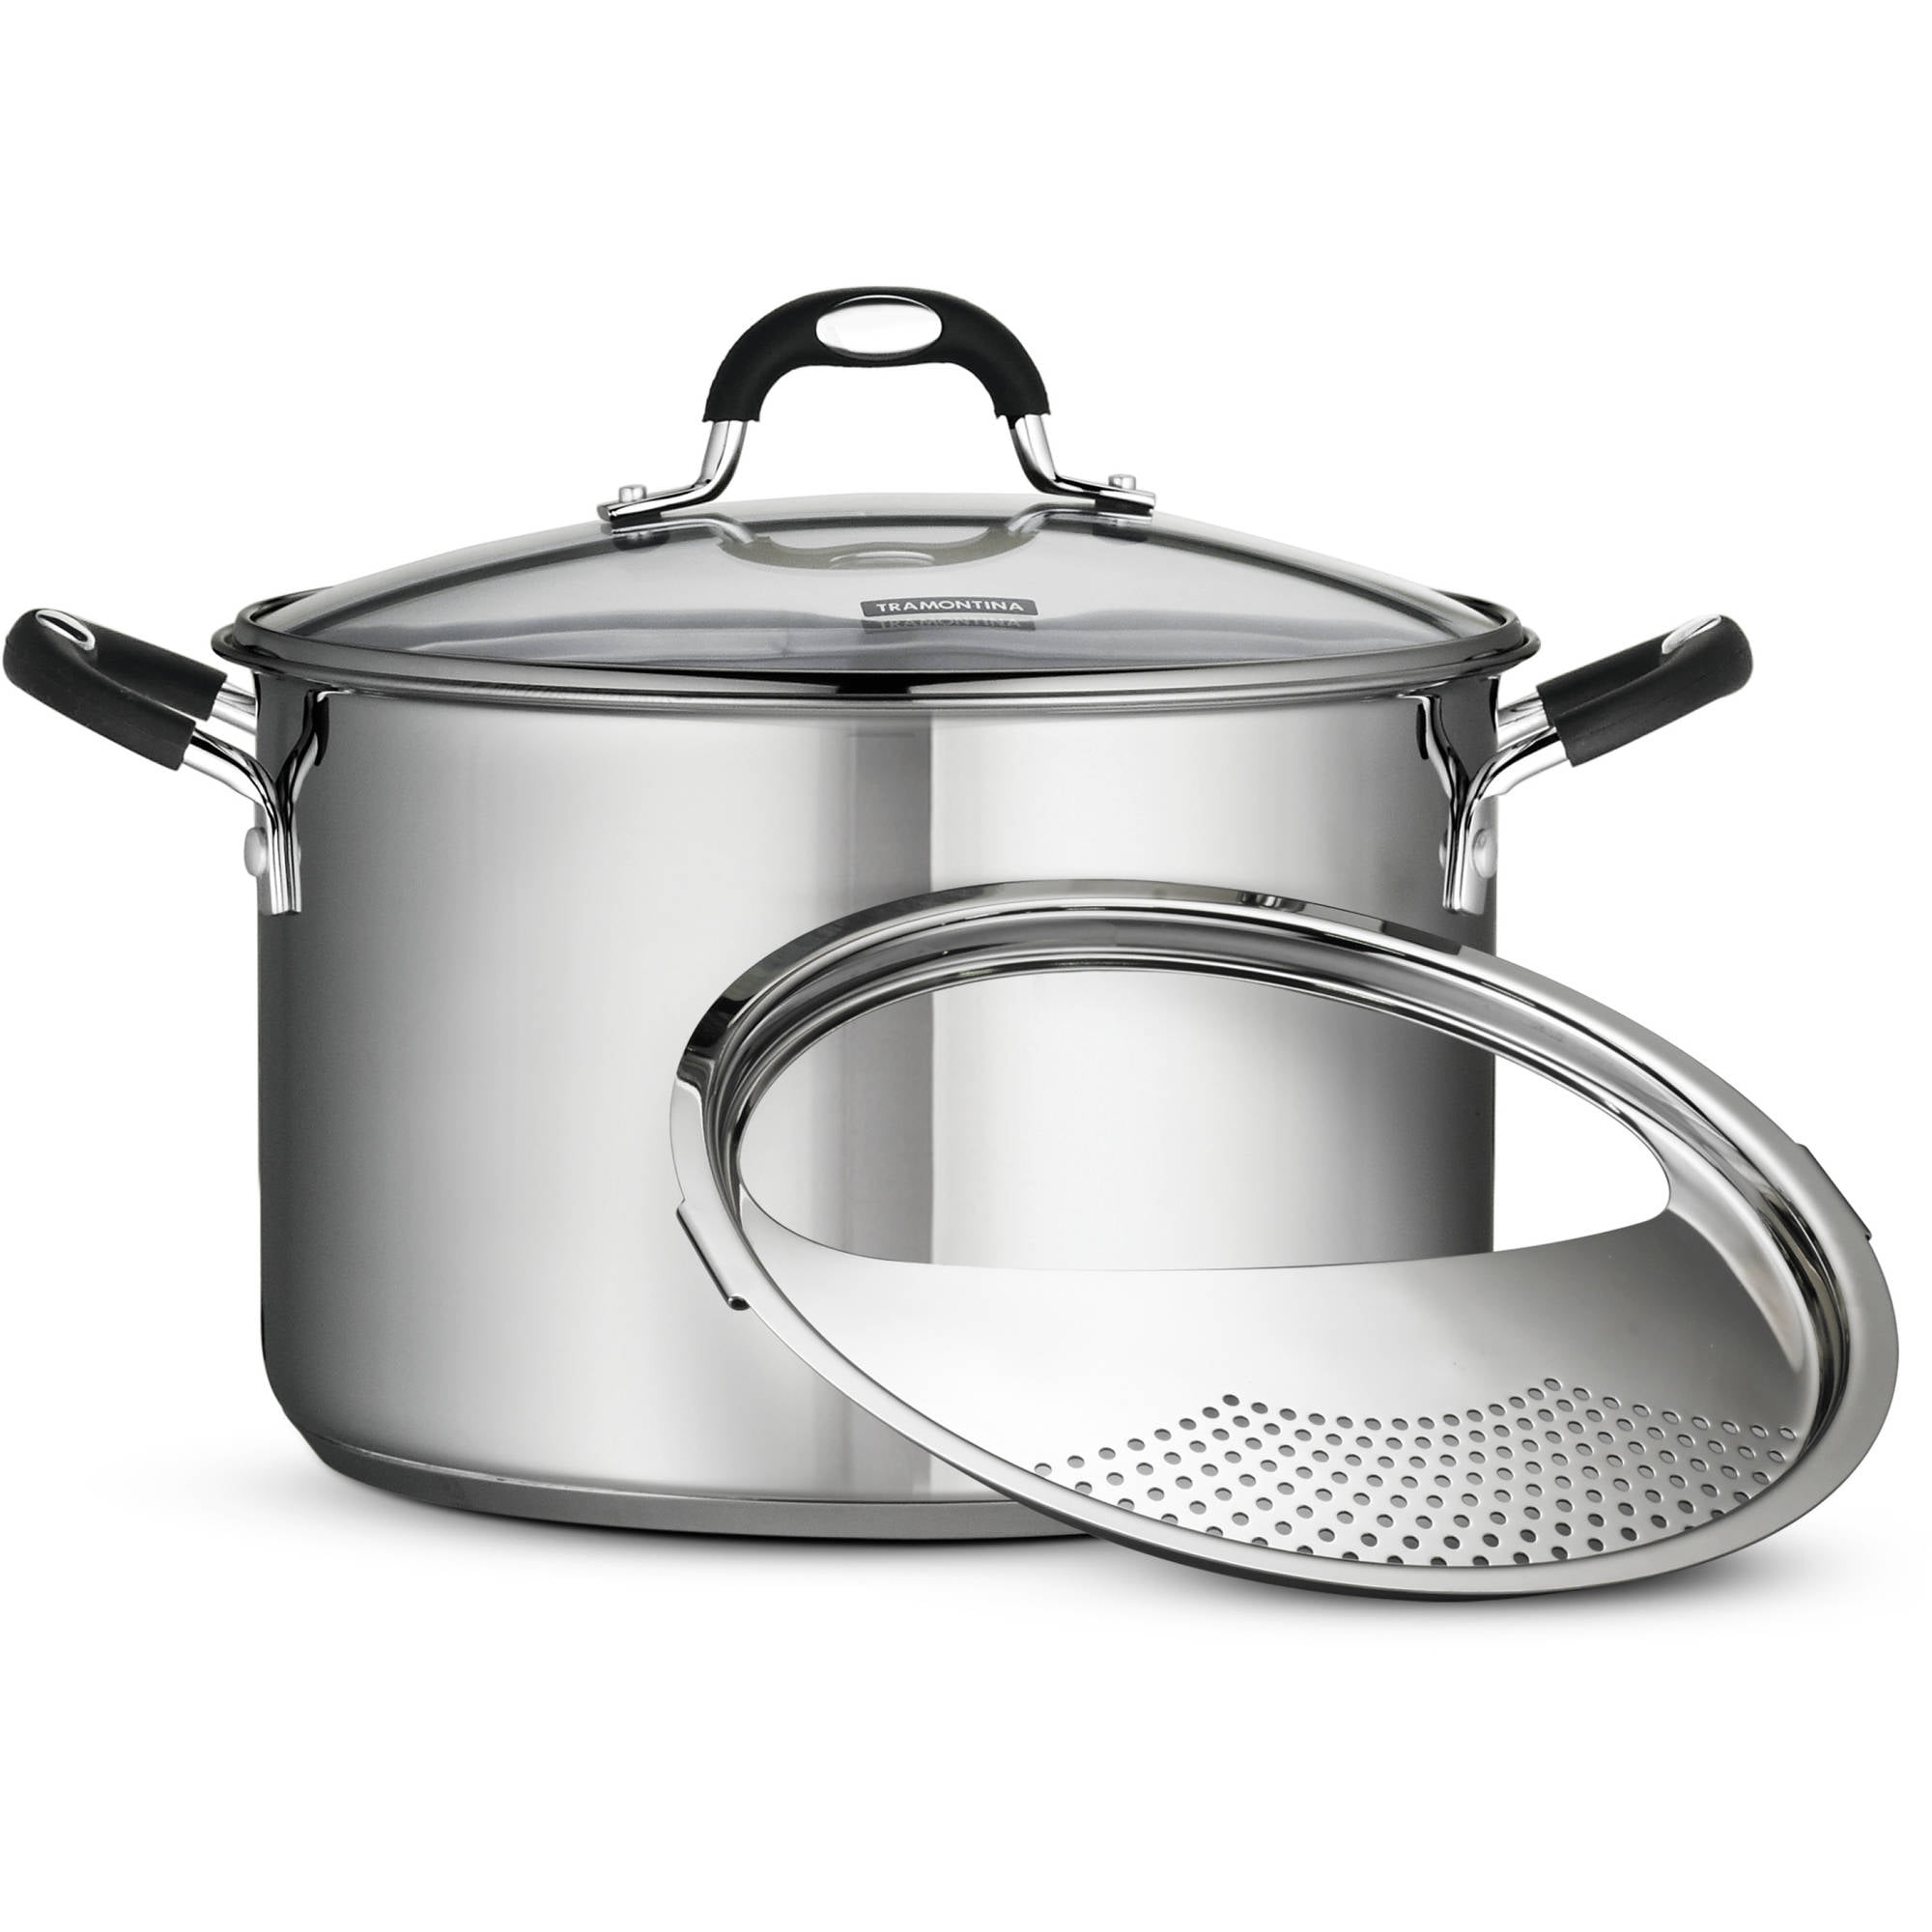 Tramontina Lock-N-Drain Stainless Steel 6 Quart Covered Stock Pot 3 Count 